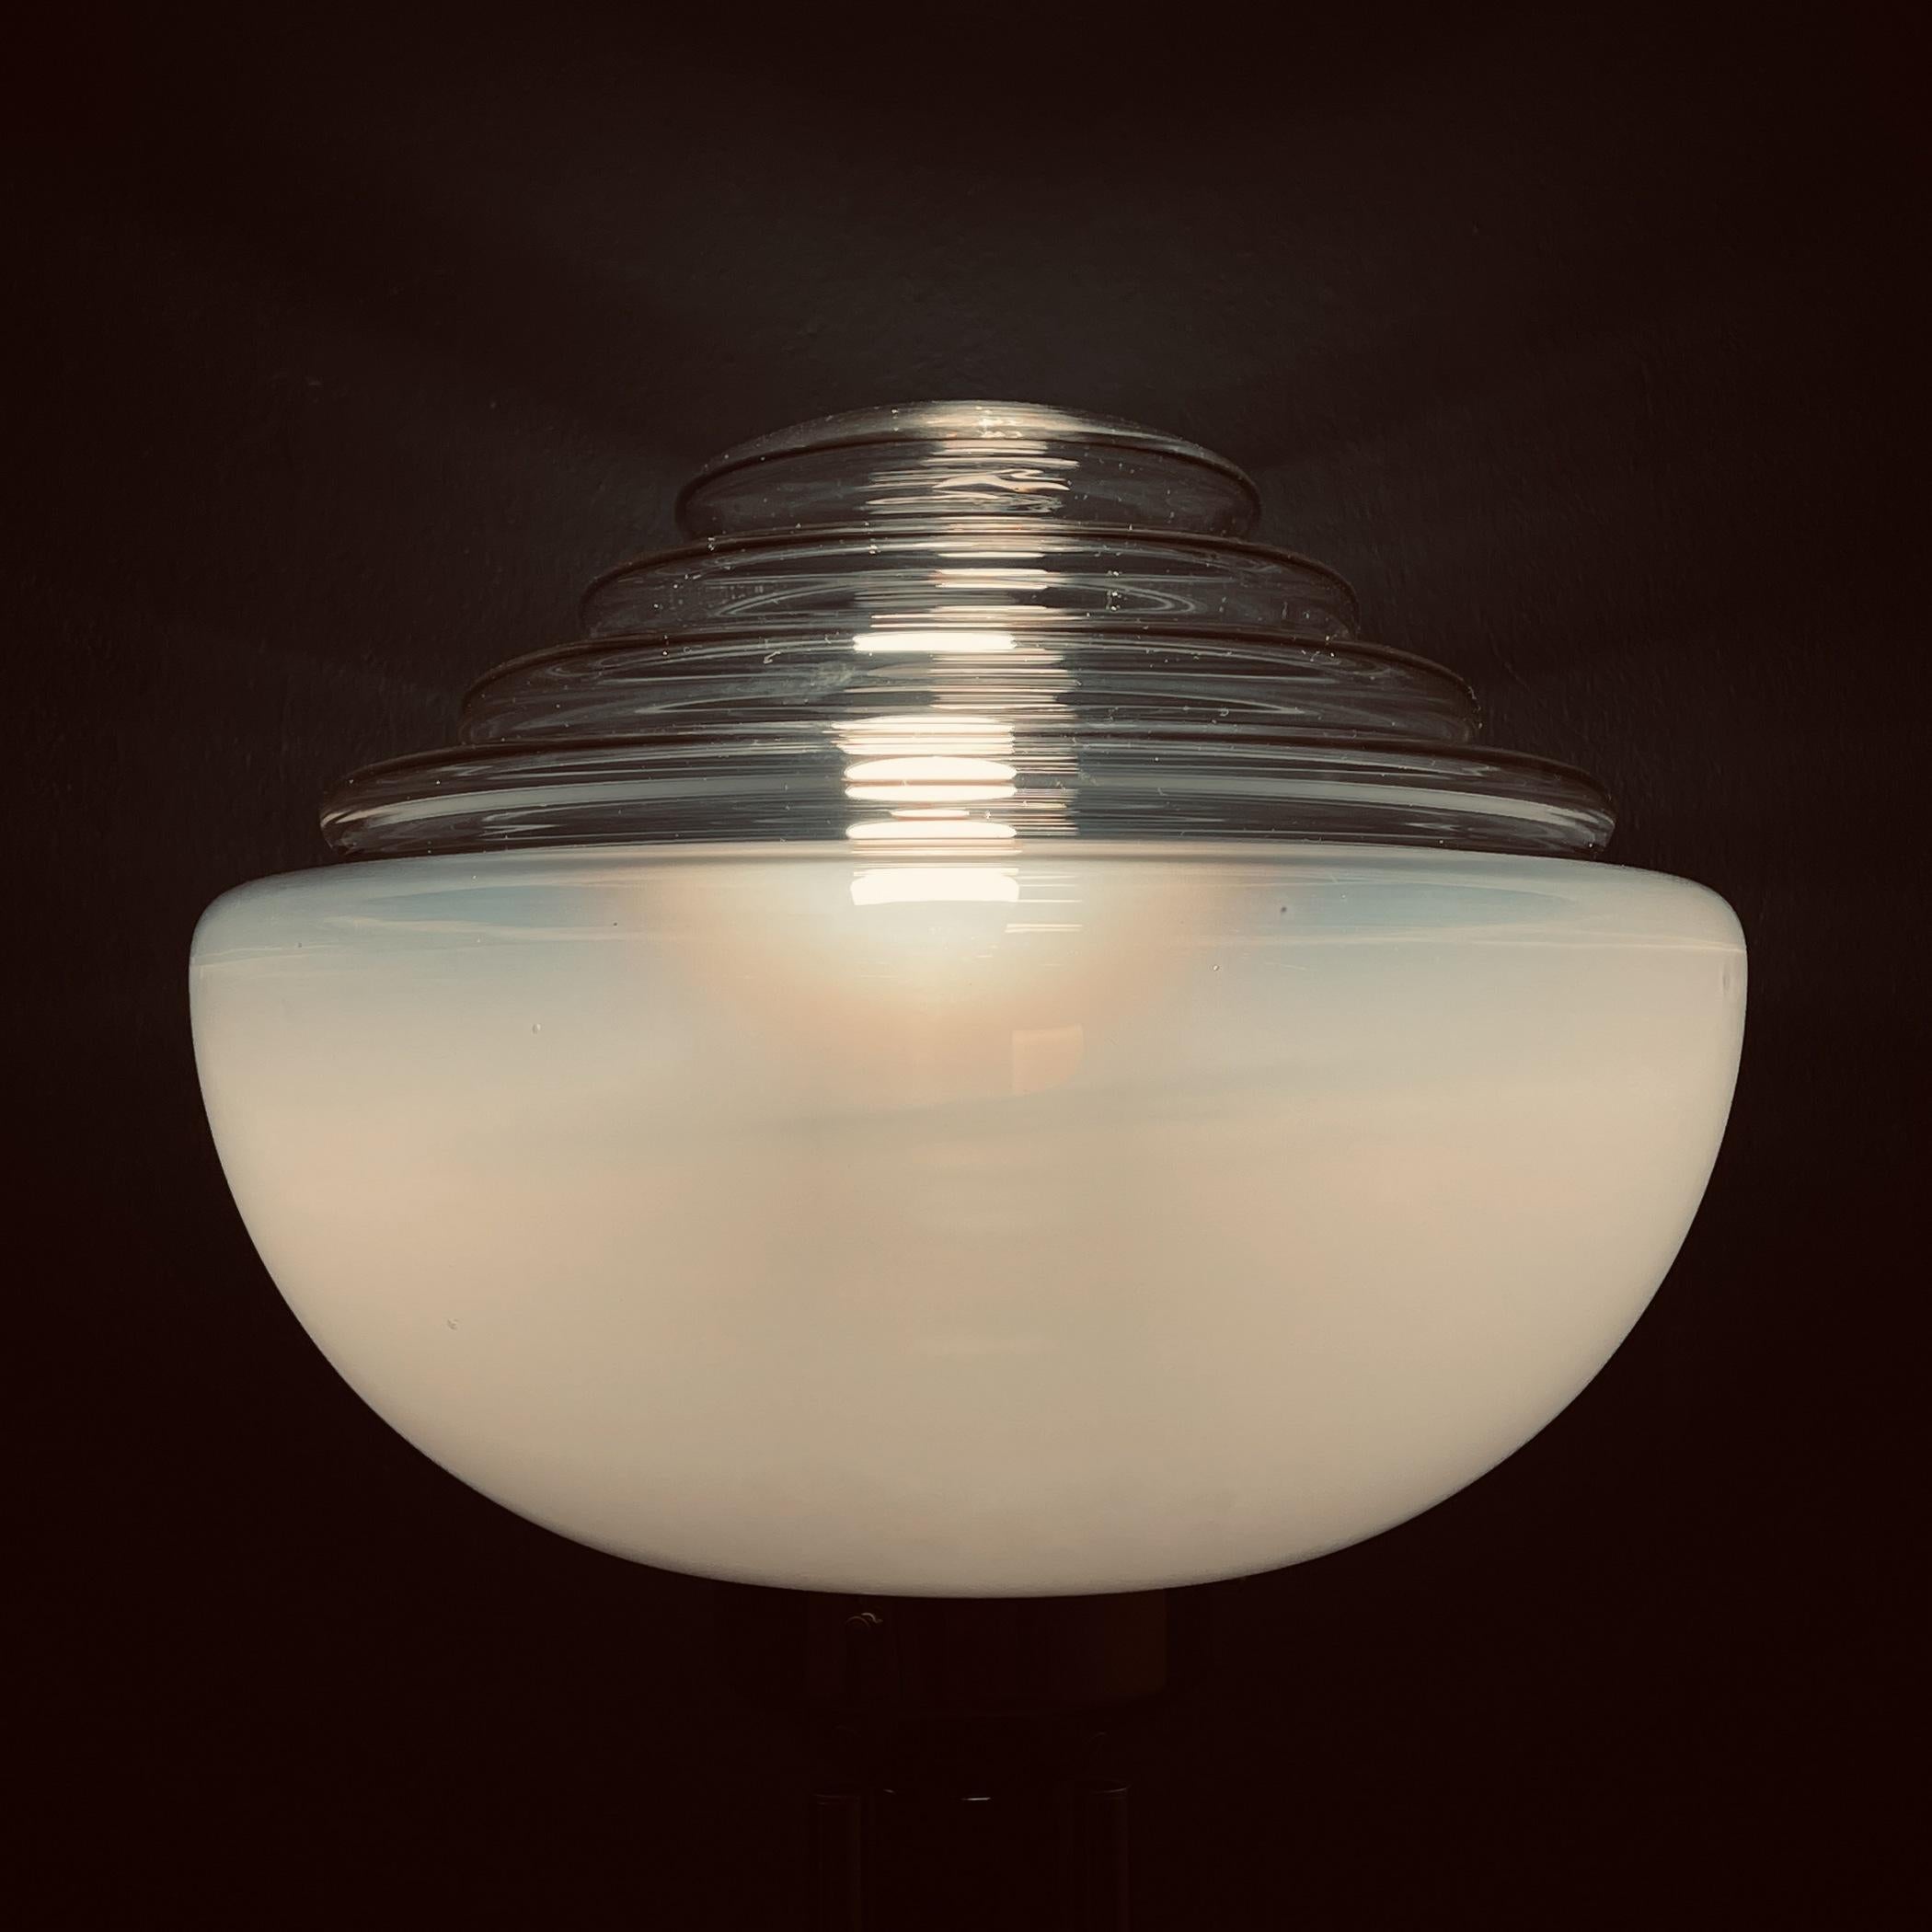 Mid-century milky white Murano glass floor lamp by Mazzega, made in Italy in the 1970s. The lamp is of a very unusual and rare shape. This perfectly conveys the spirit of the space age, the mid-century style. Excellent vintage condition, no chips or